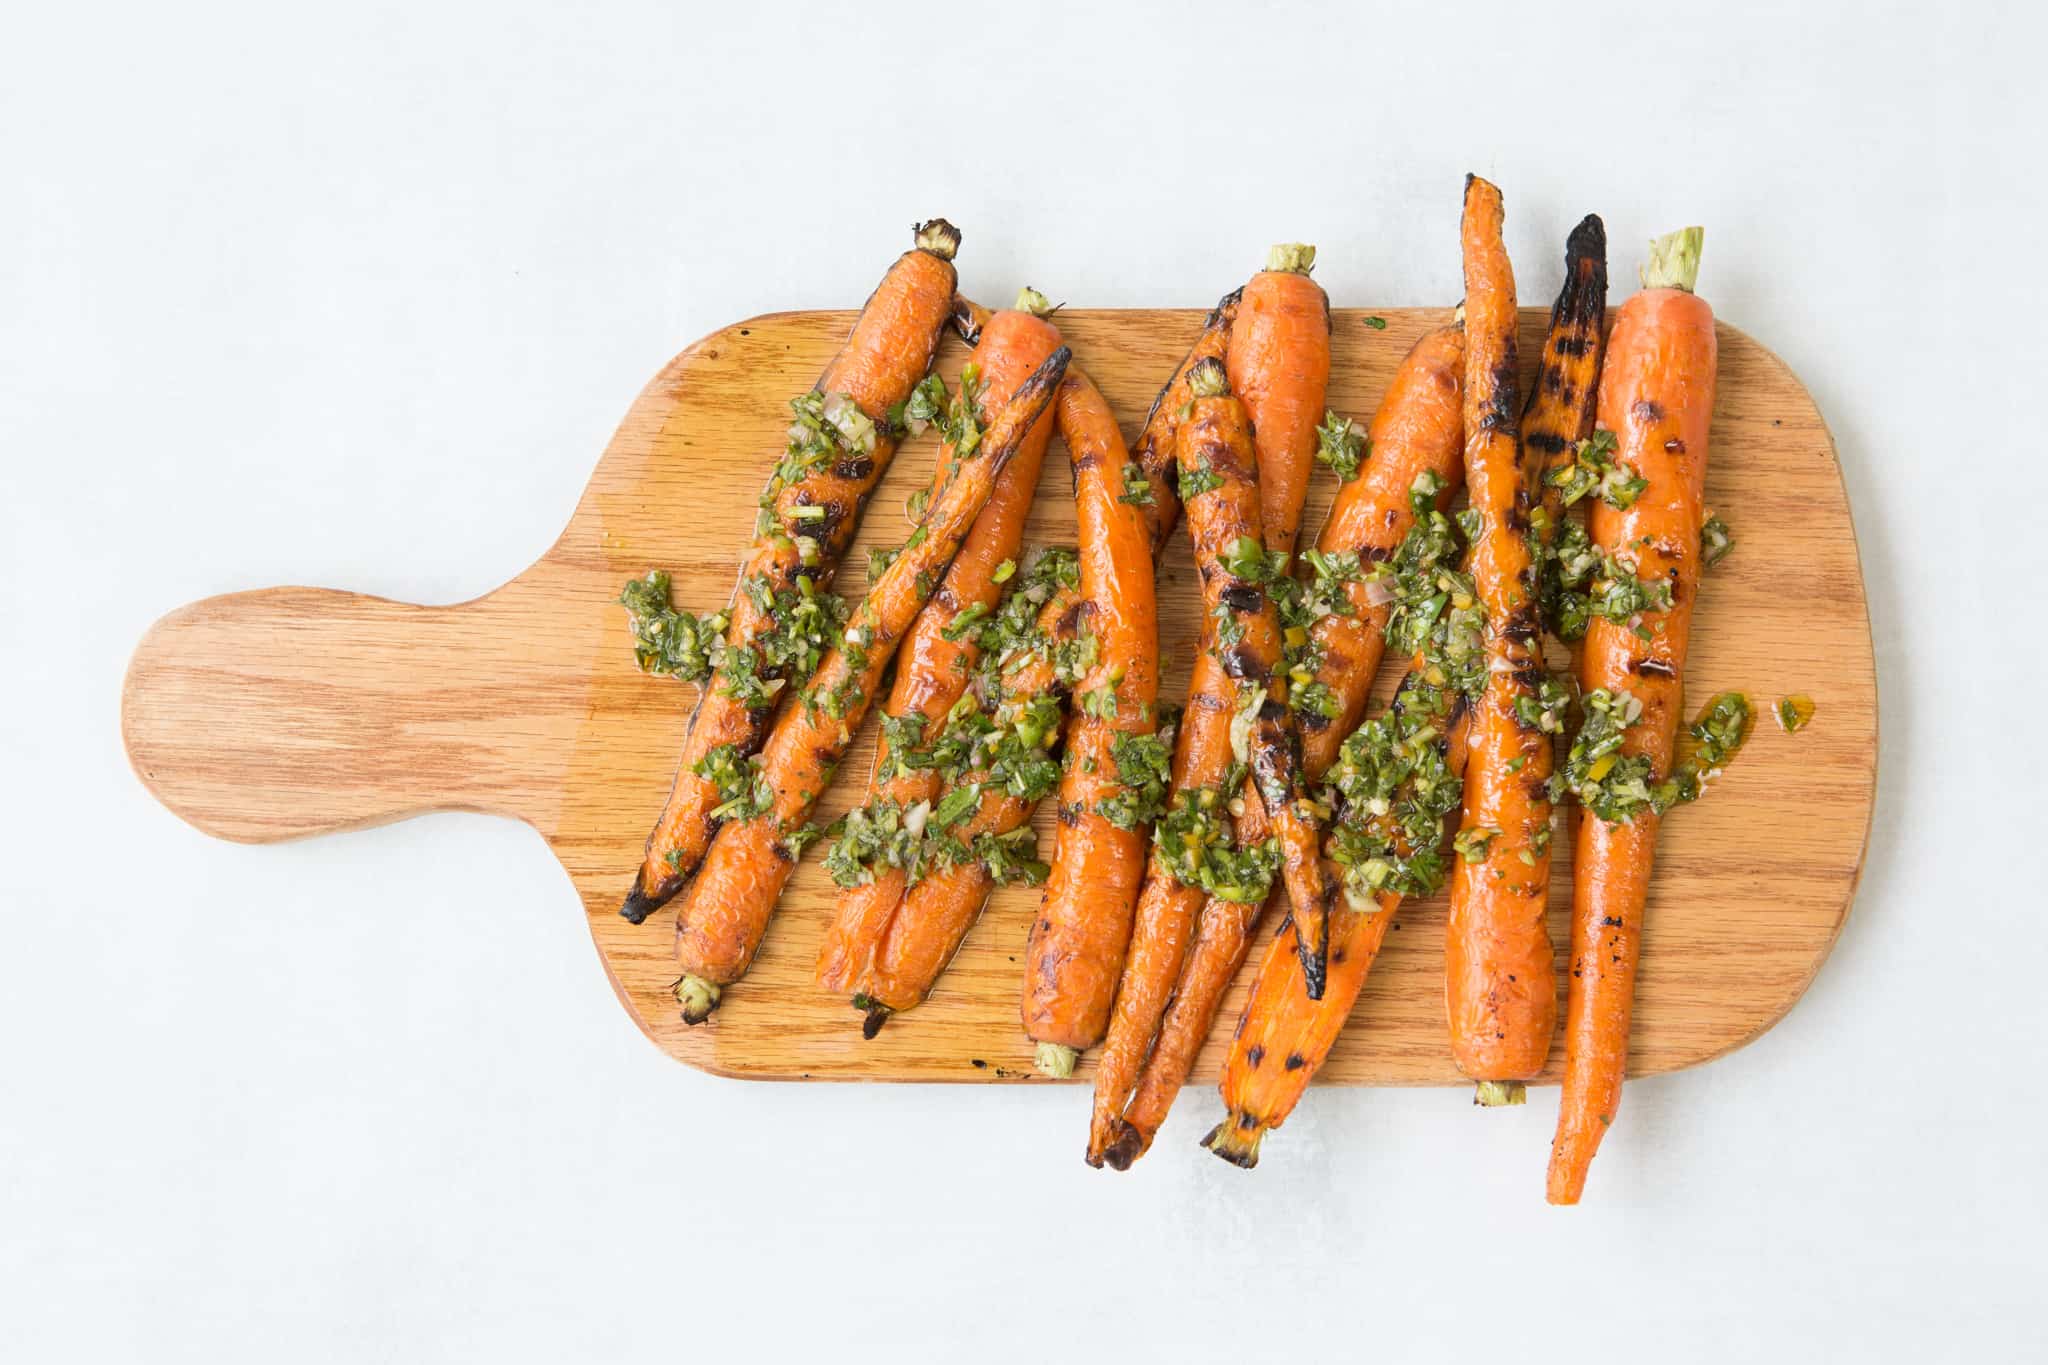 Grilled carrots with chimuchurri sauce